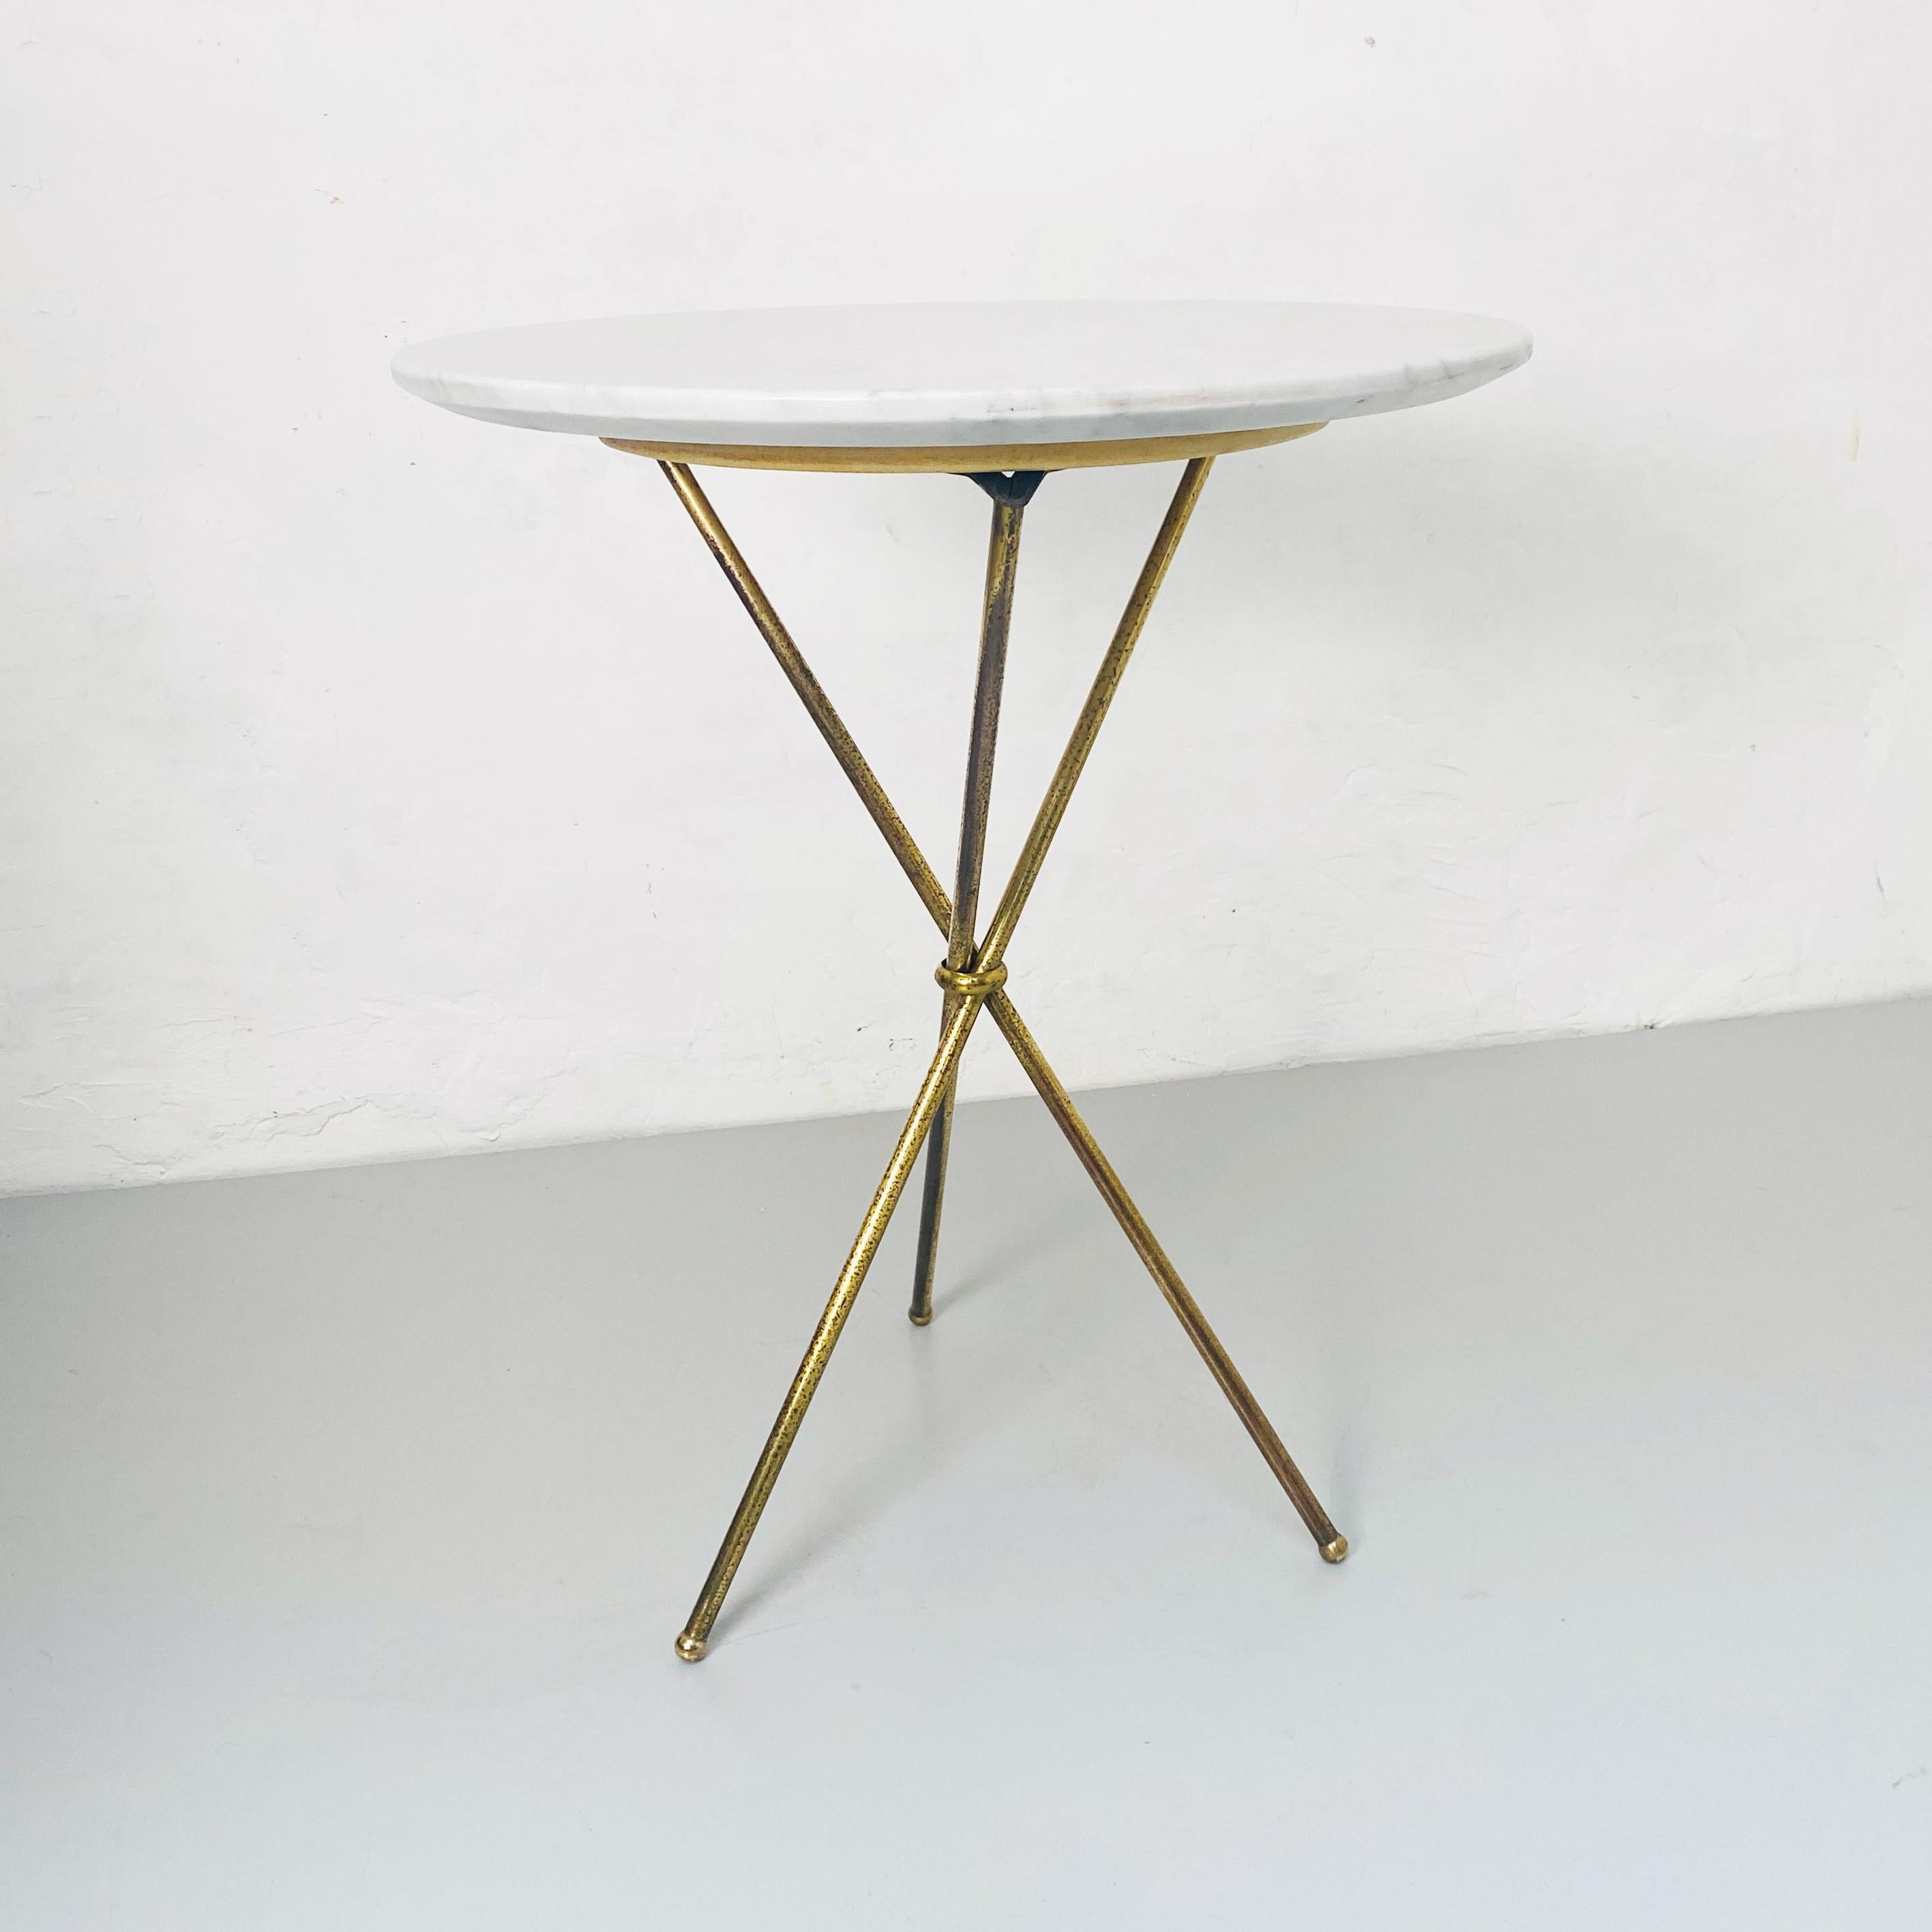 Italian Mid-Century Modern Round Marble and Brass Coffee Table, 1960s 1